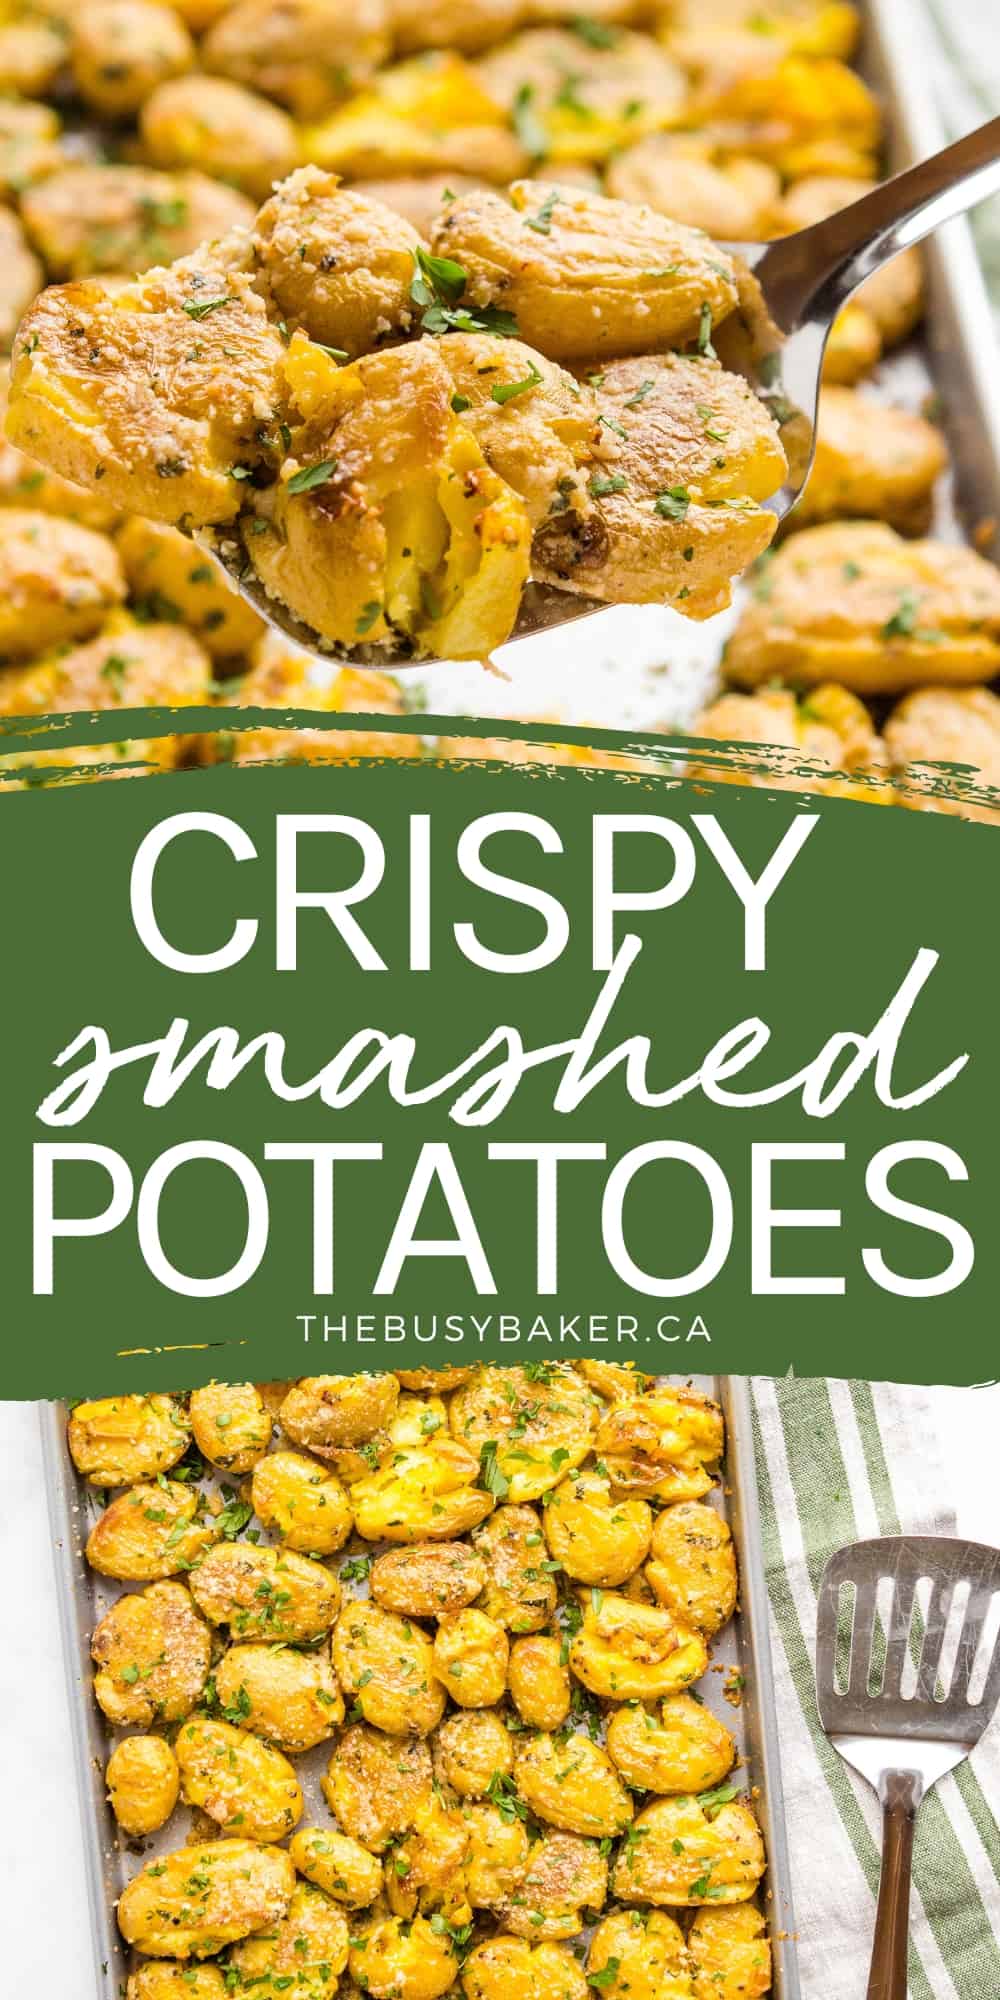 These Crispy Smashed Potatoes with Parmesan are fluffy on the inside, crispy on the outside, and flavoured with garlic, herbs, & parmesan! Recipe from thebusybaker.ca! #parmesanpotatoes #crispysmashedpotatoes #roastedpotatoes #bakedpotatoes #smashedpotatoes via @busybakerblog